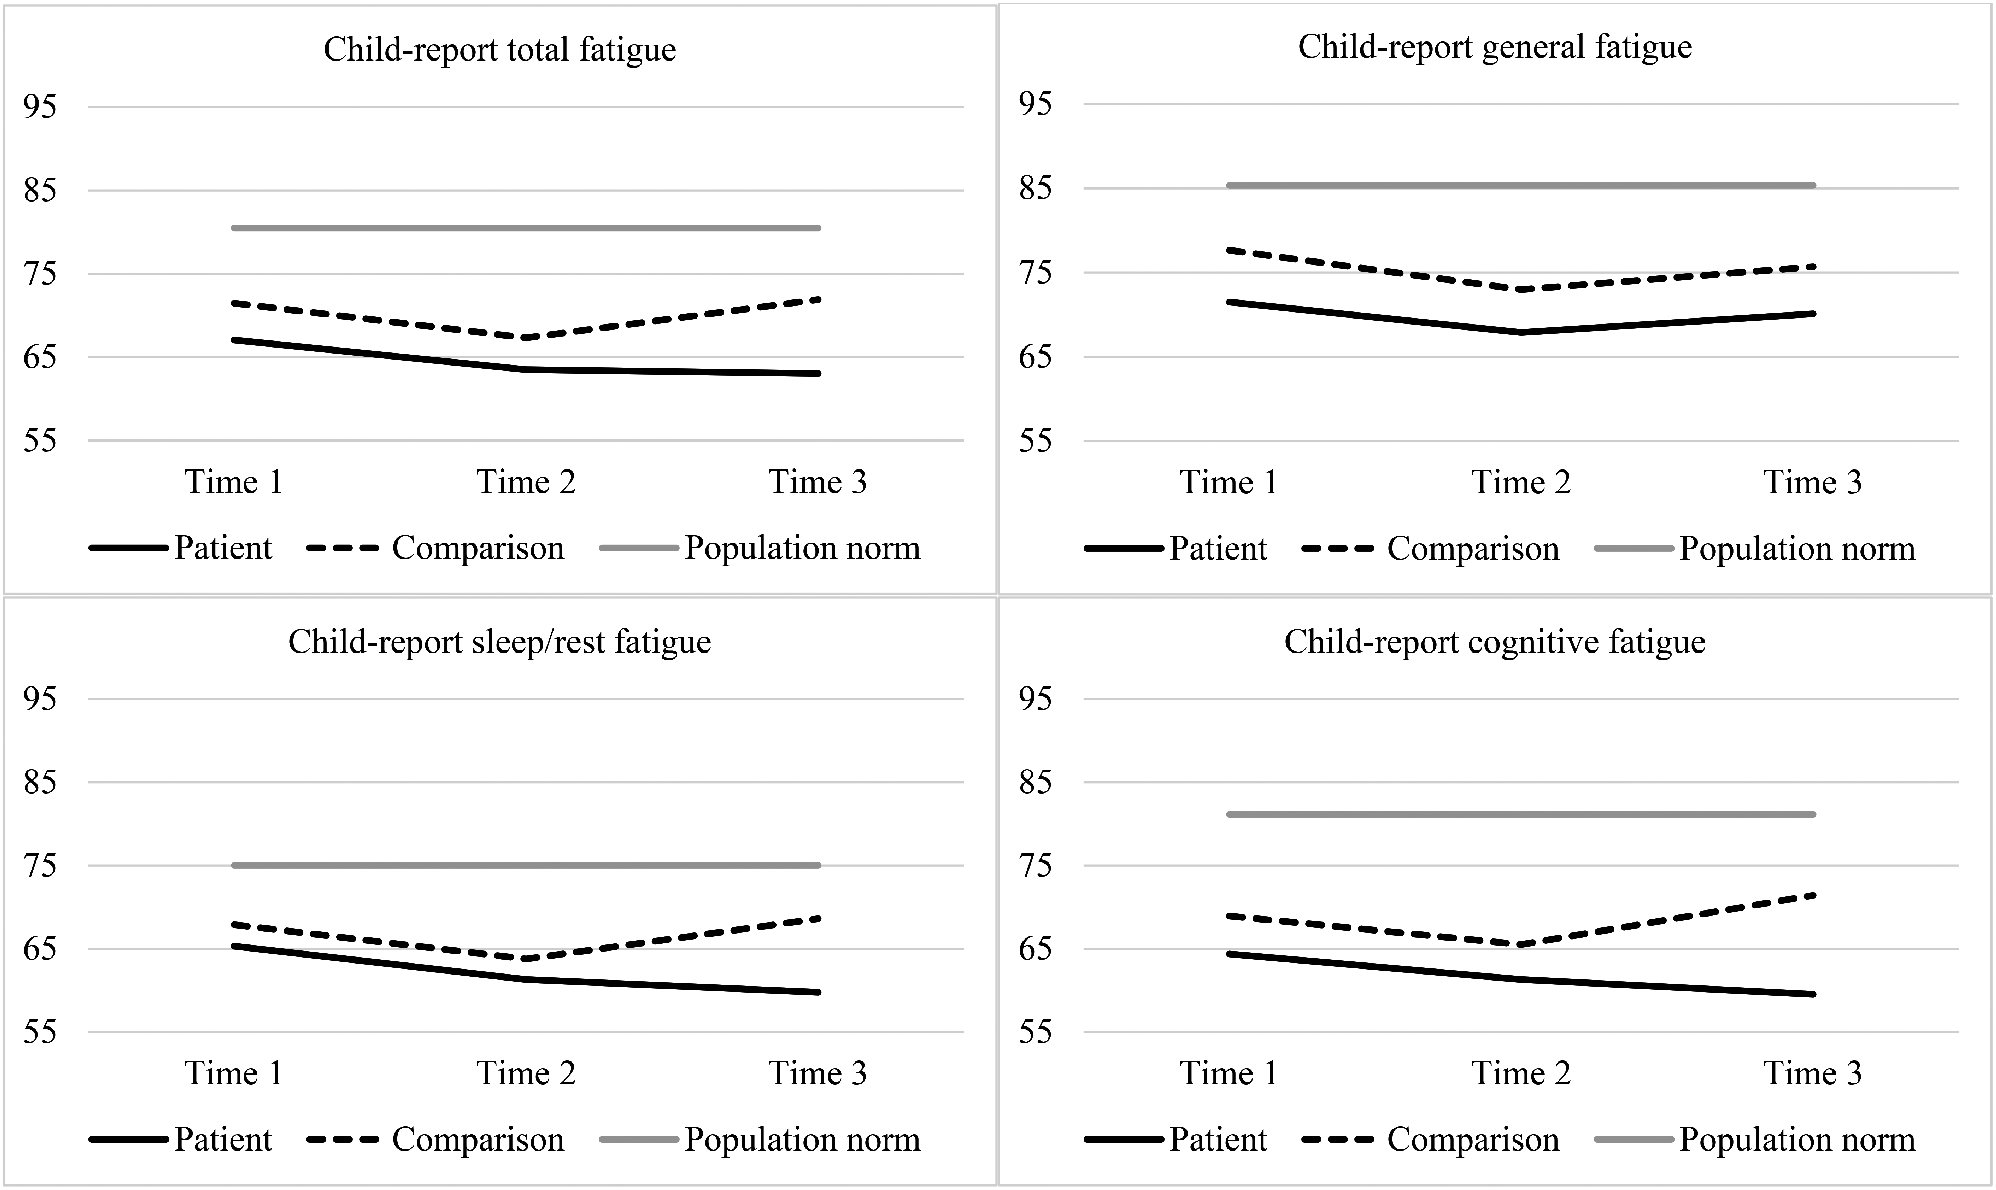 Fatigue in children who have recently completed treatment for acute lymphoblastic leukemia: a longitudinal study